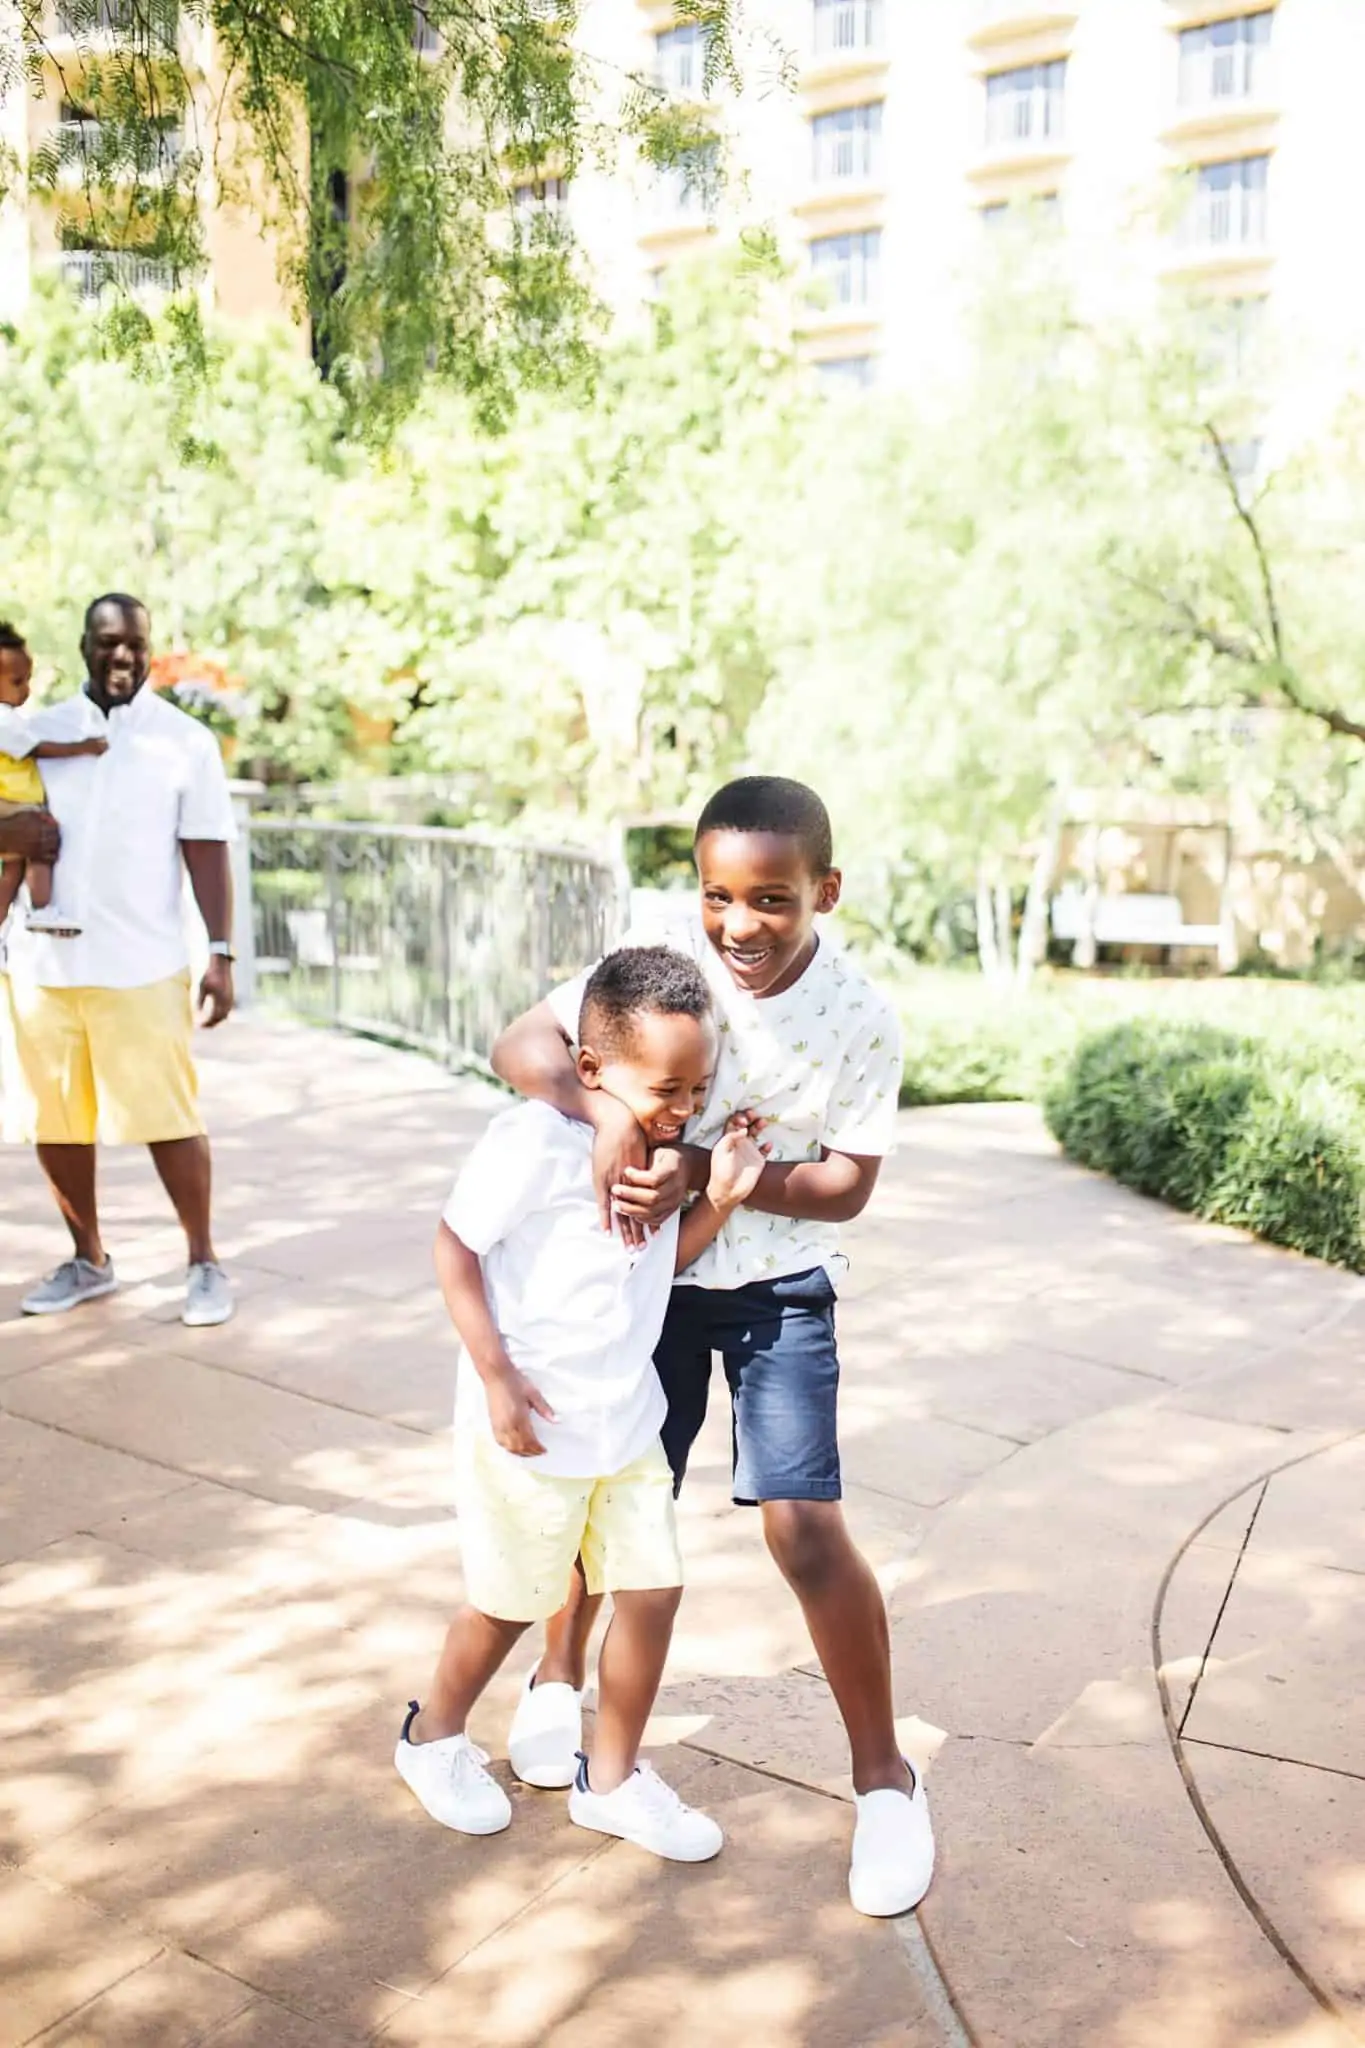 How To Plan A Family Staycation featured by top US lifestyle blog, Glamorous Versatility